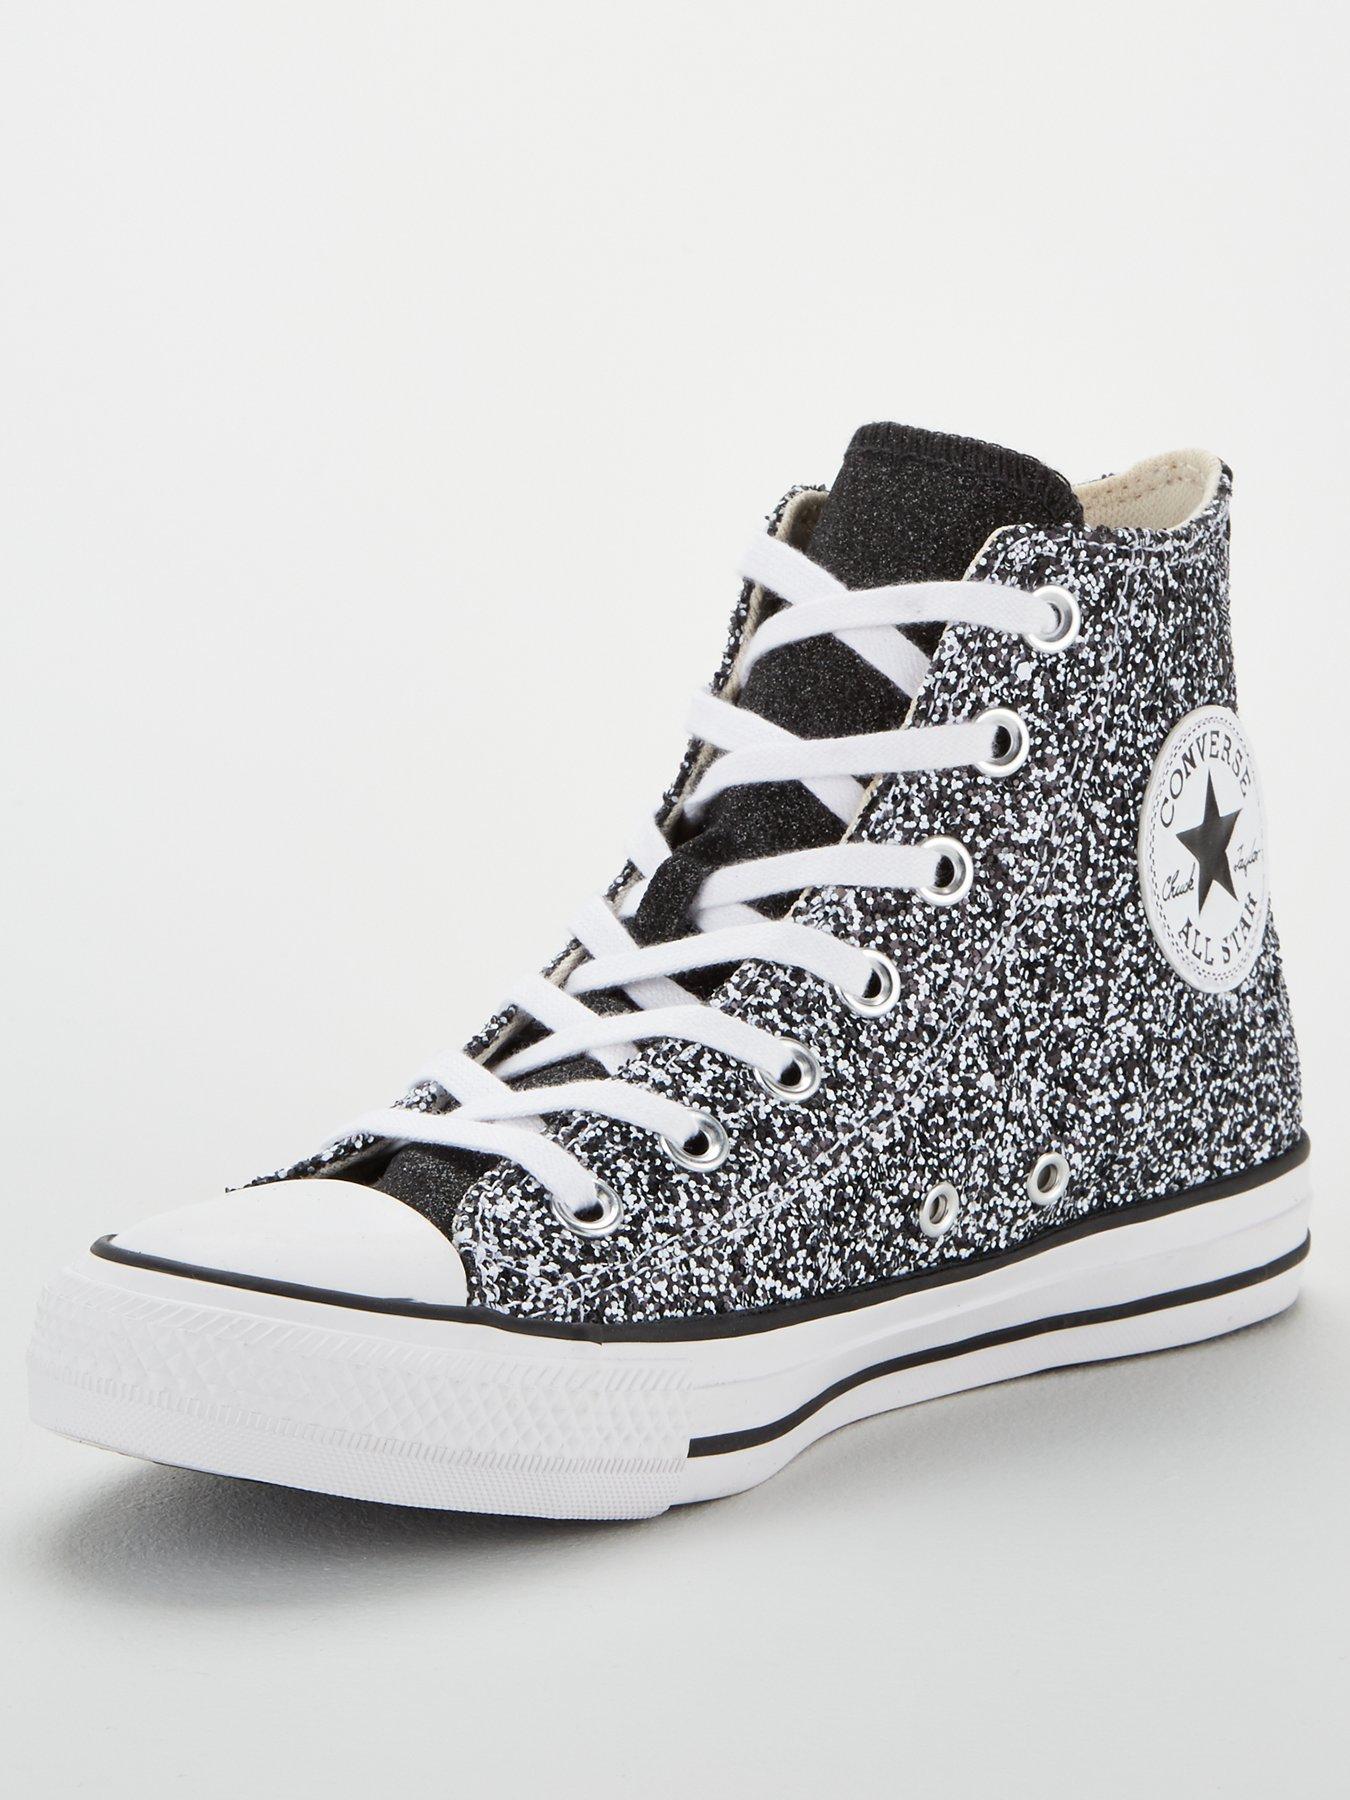 Converse Galaxy Dust Chuck Taylor All Star High Top - Black/White | very.co. uk